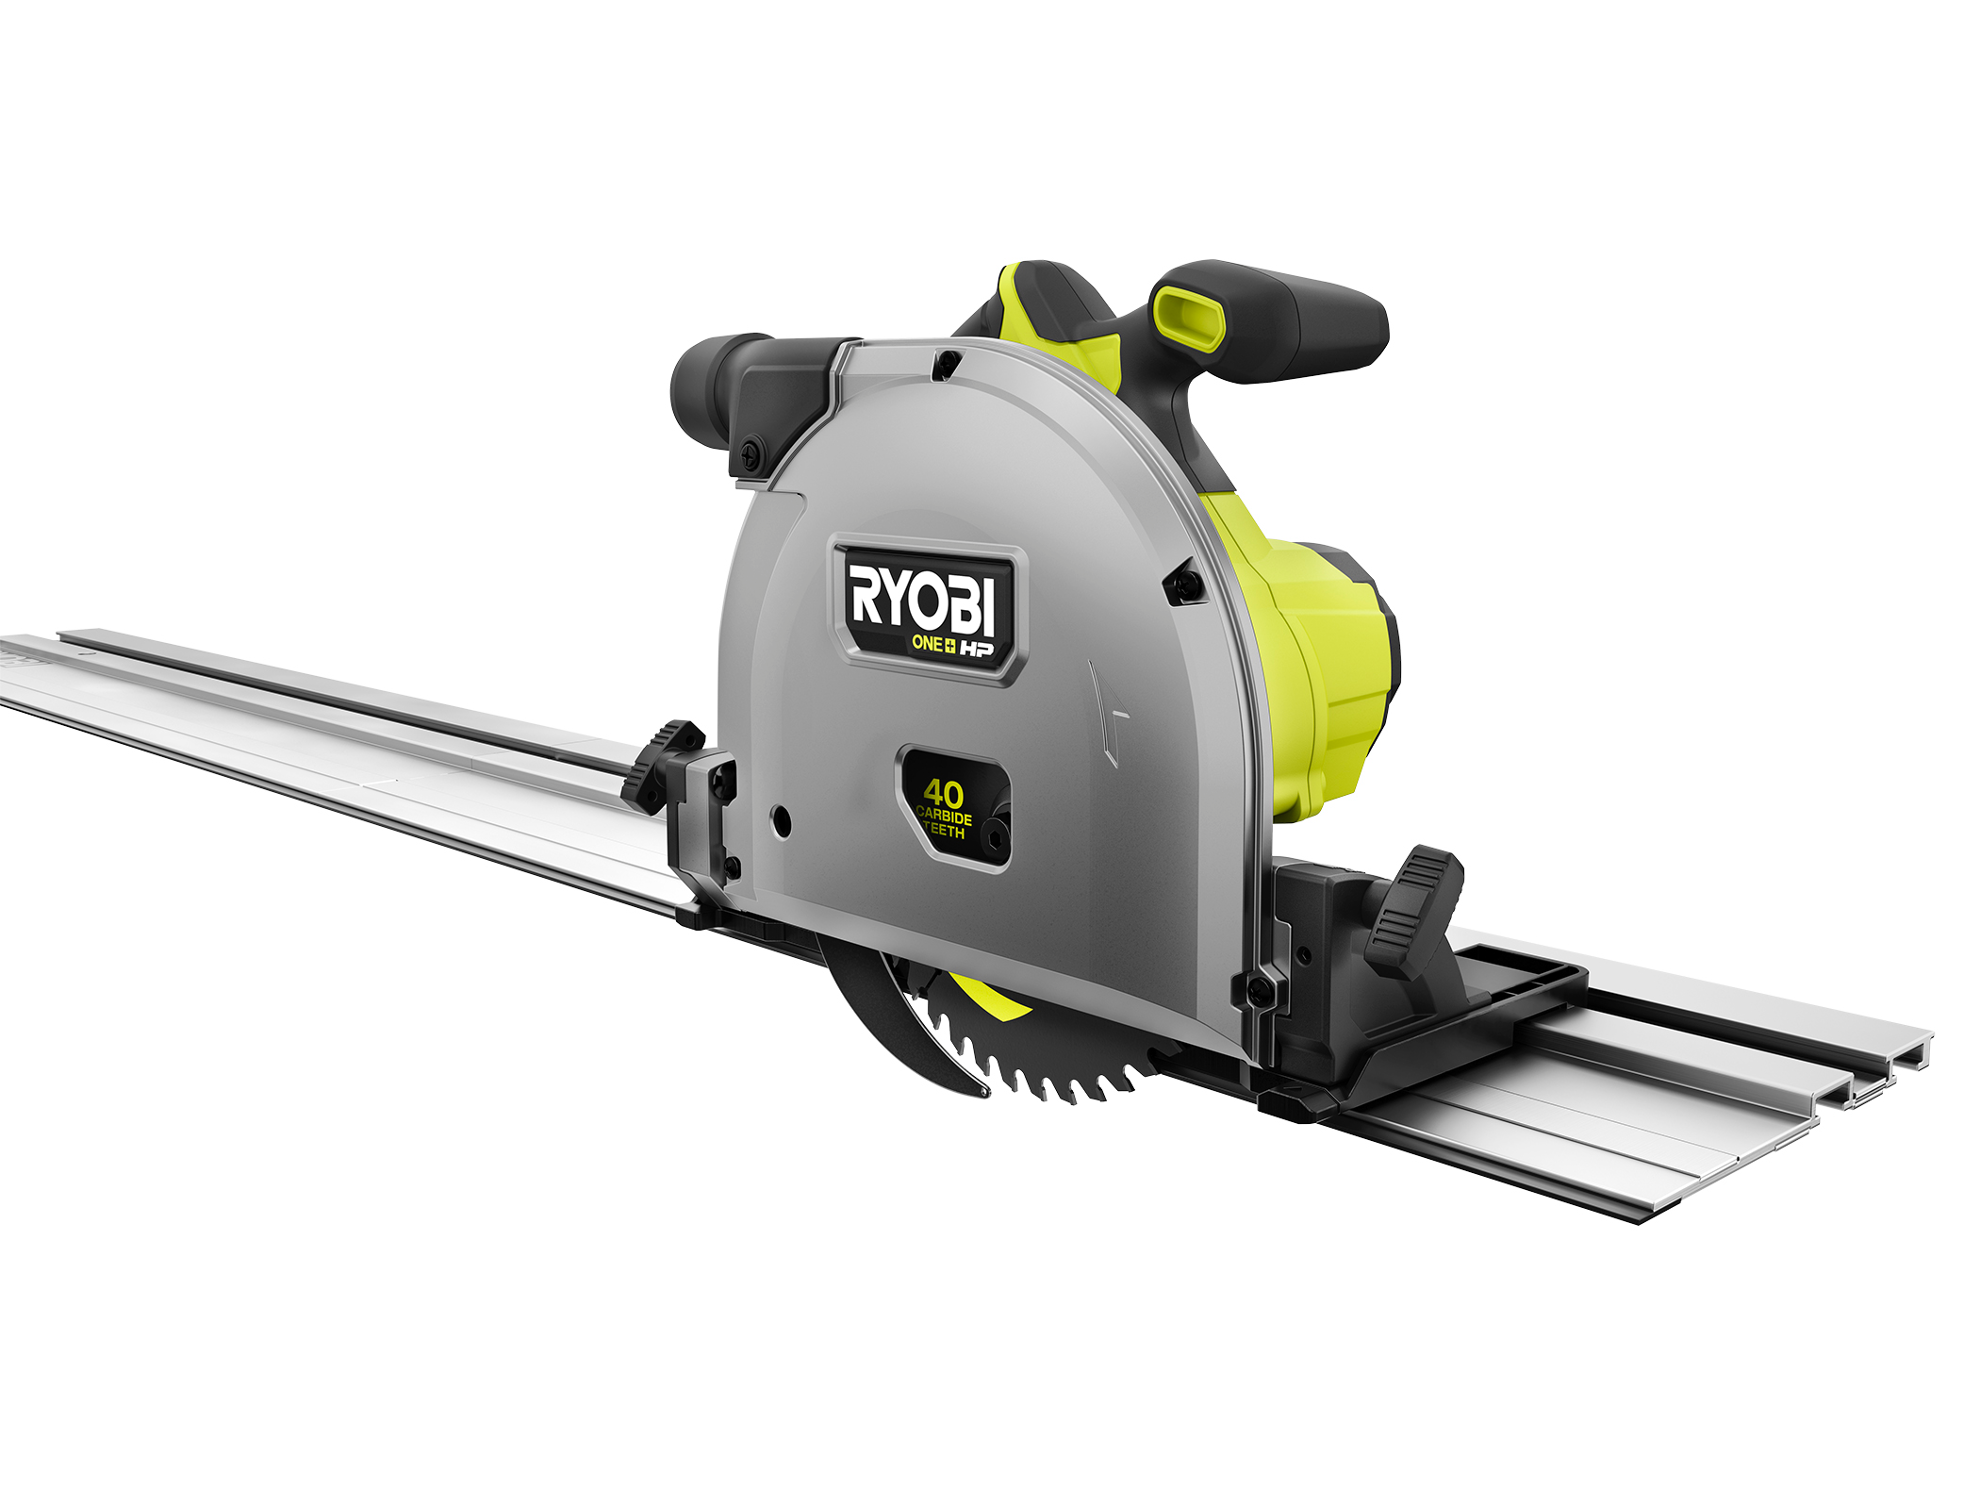 Photo: Compatible with the RYOBI 18V ONE+ HP Brushless 6-1/2” Track Saw (PTS01)